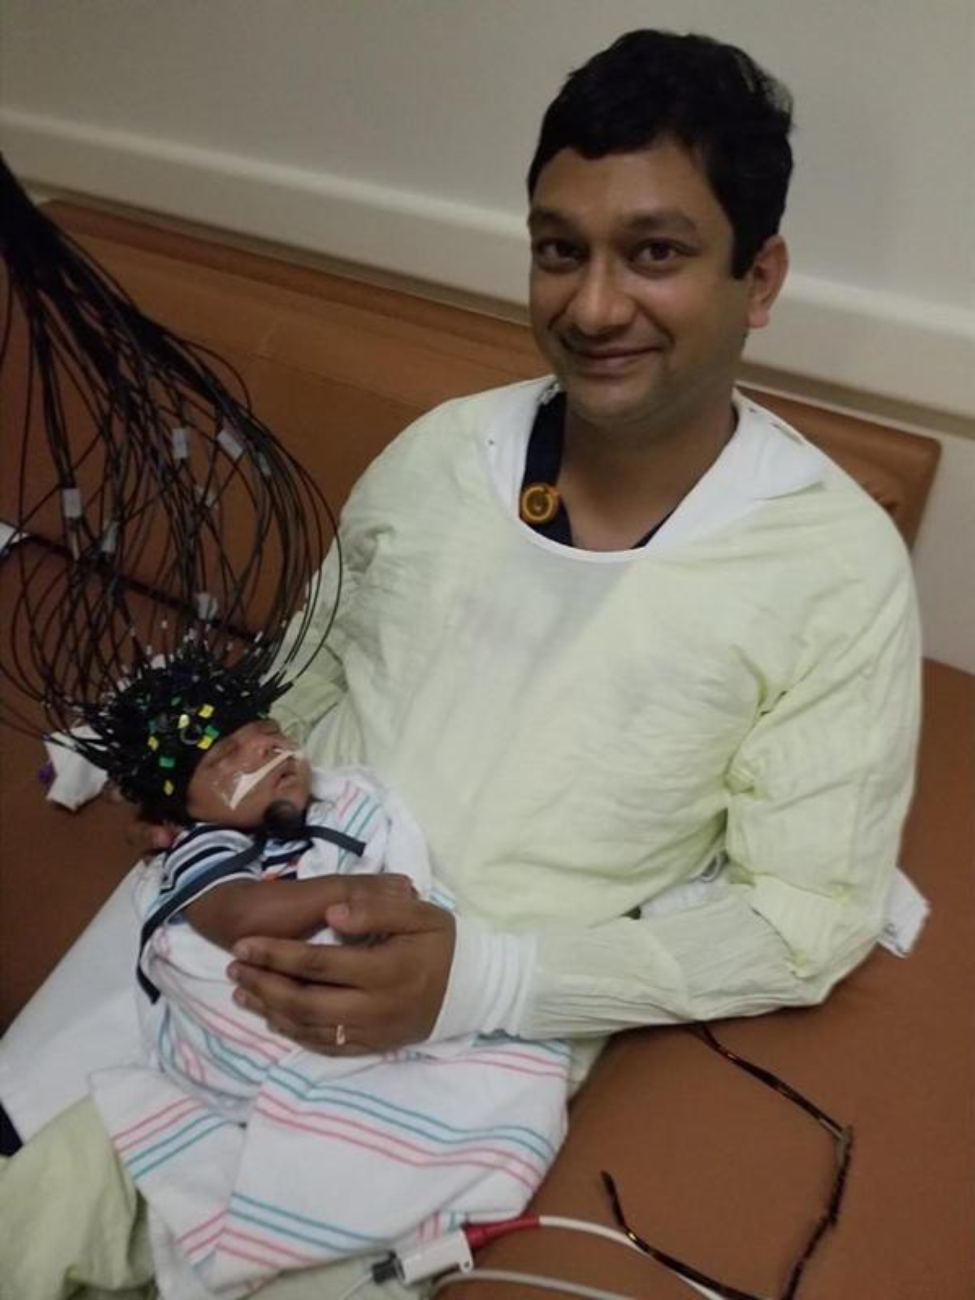 In 2018, Aries was the first child to use the CTOT brain imaging device developed by Manish N. Shah, MD, and his team at UTHealth Houston. (Photo provided by Aisha Atkinson)